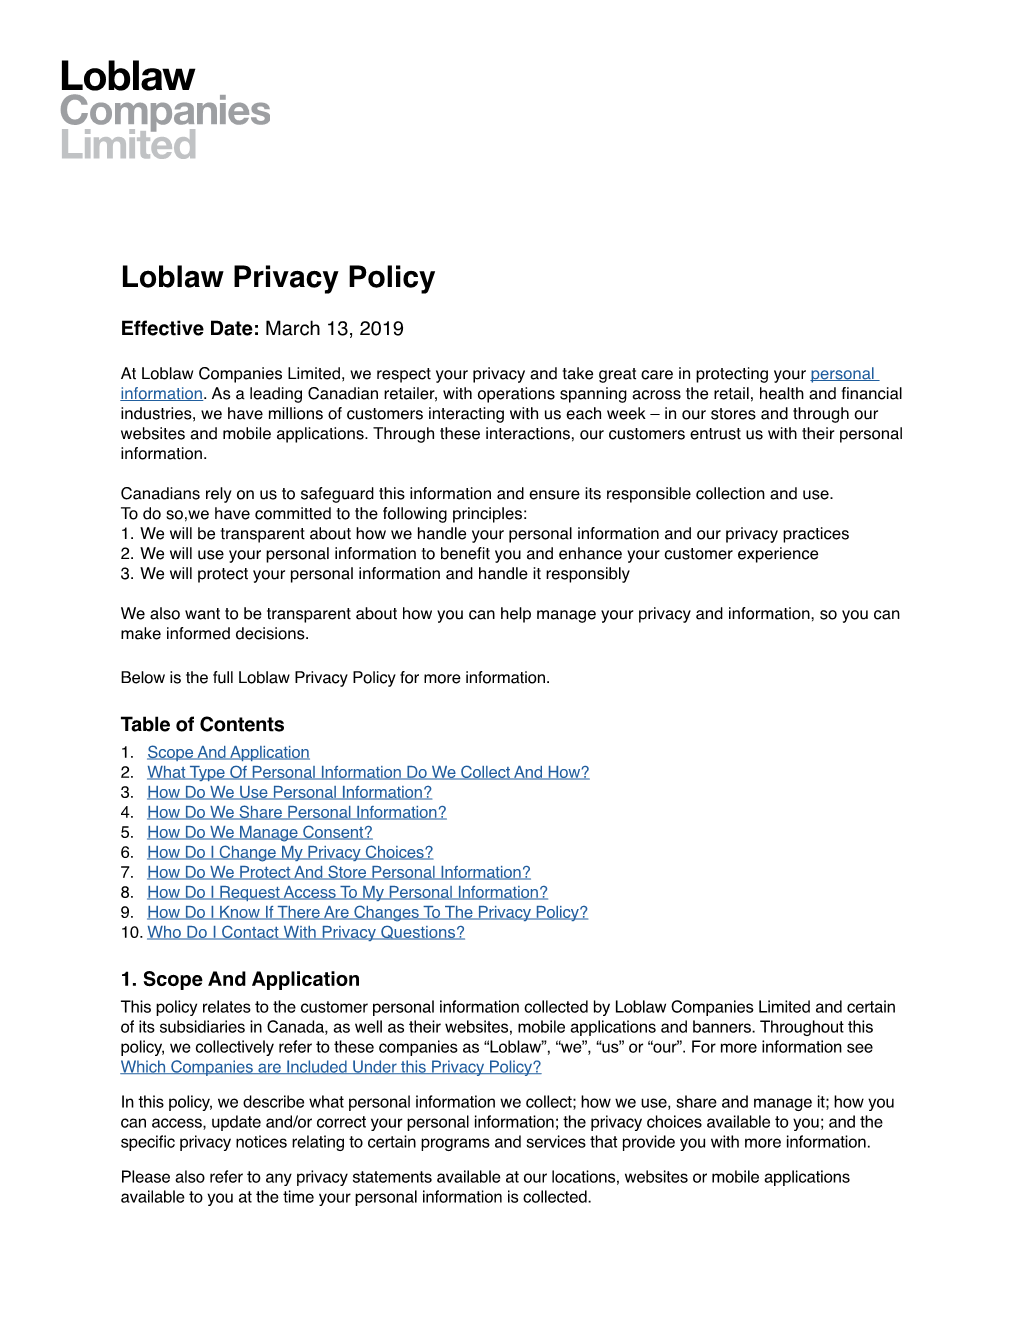 Full Loblaw Privacy Policy for More Information